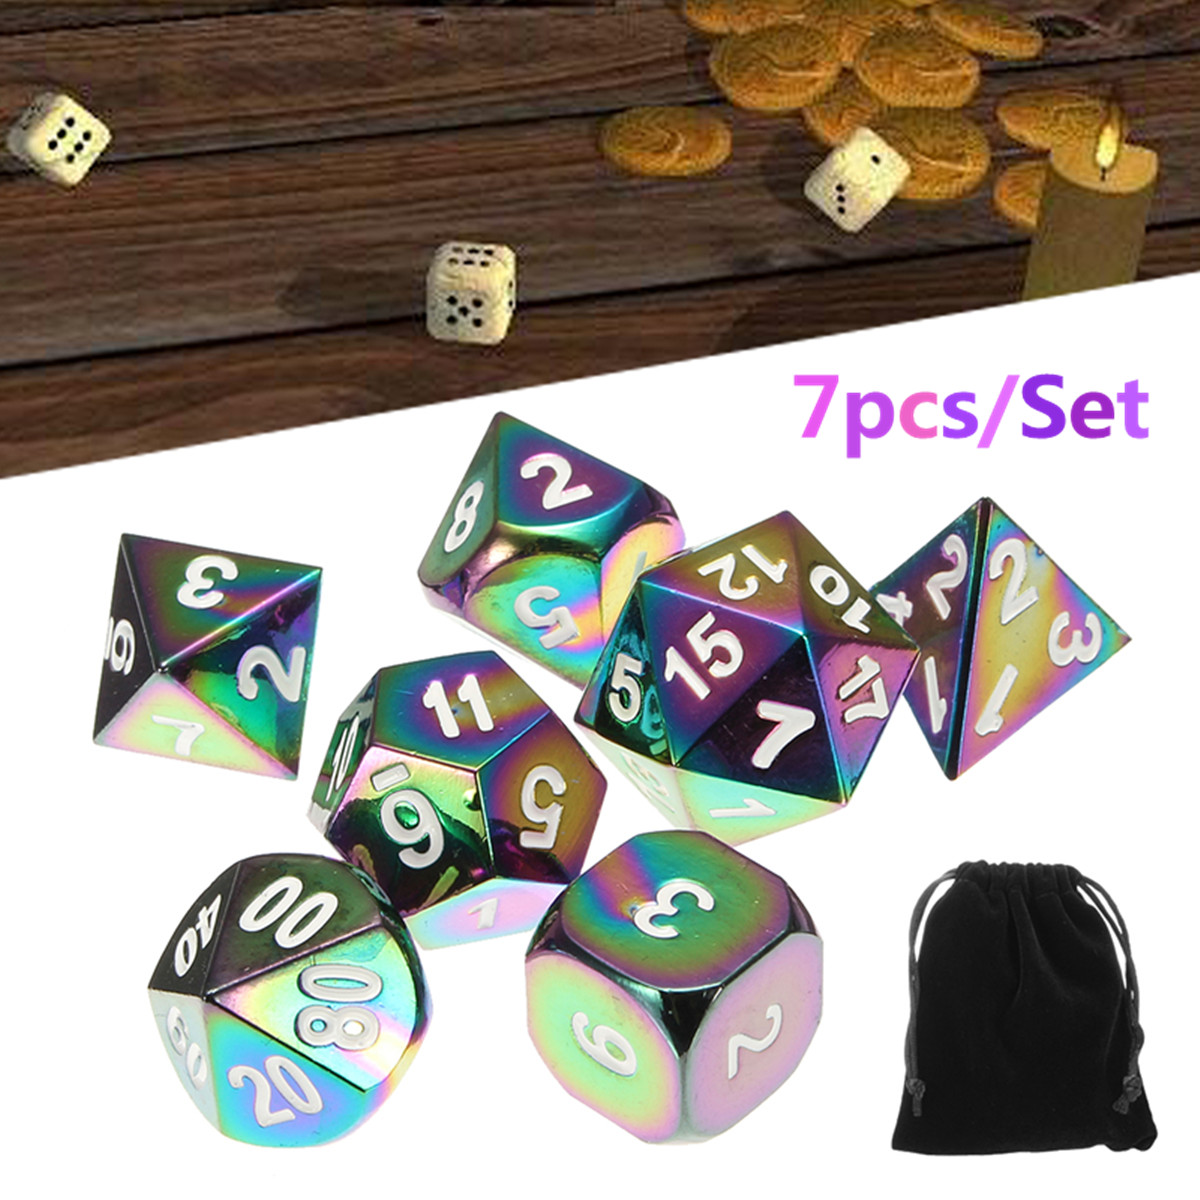 7Pcs-Colorful-Zinc-Alloy-Polyhedral-Dice-Set-Board-Game-Multisided-Dices-Gadget-1241484-1